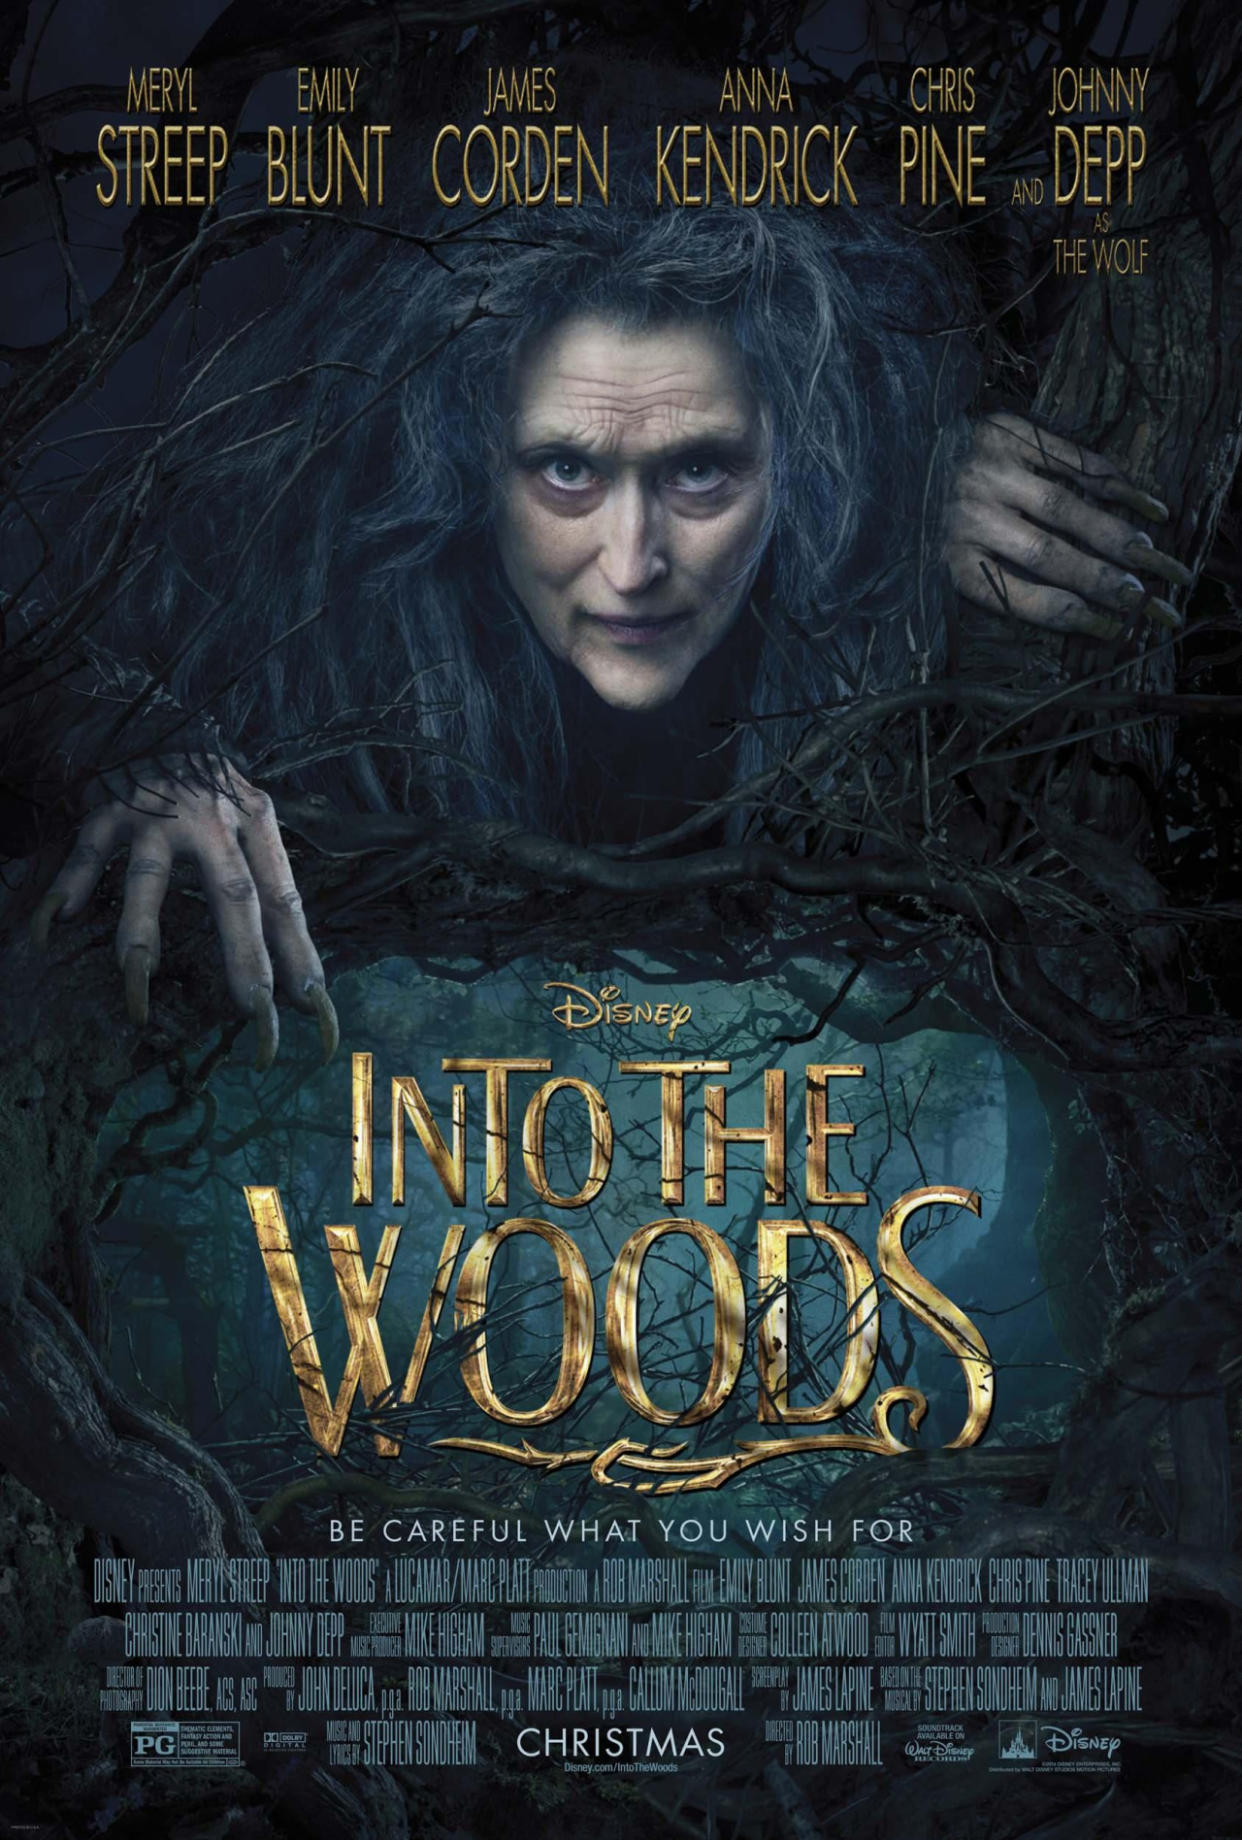 Meryl Streep in the poster for Into the Woods